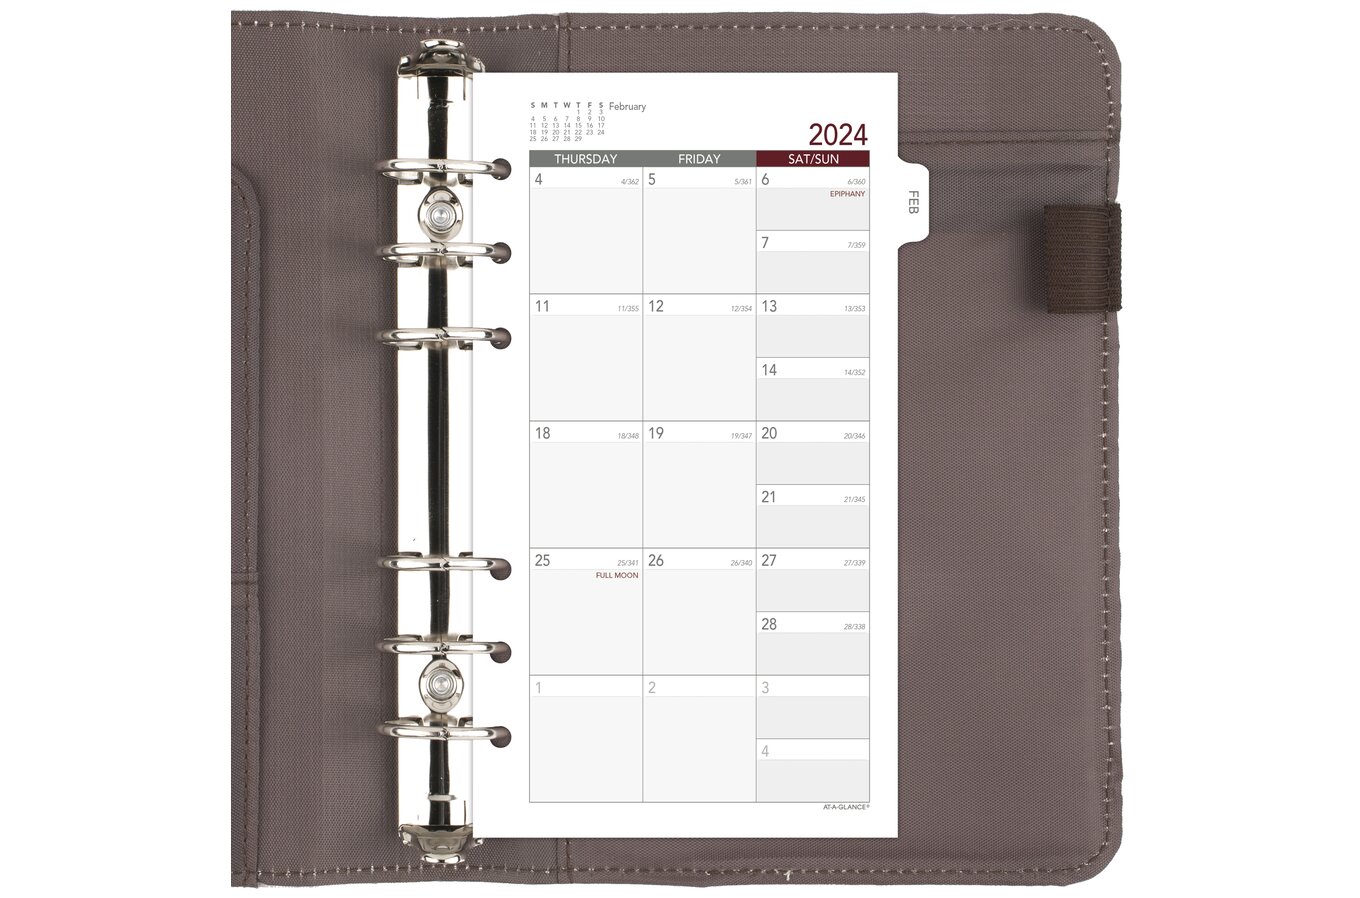  2024 Planner Refills - 3-Tier Down Weekly & Monthly Planner  Refill, Jan. 2024 - Dec. 2024, 5.5'' x 8.25'', A5 Planner Refill 2024, 7  Hole Loose Leaf, Monthly Tabs, 60 Minutes Intervals : Office Products